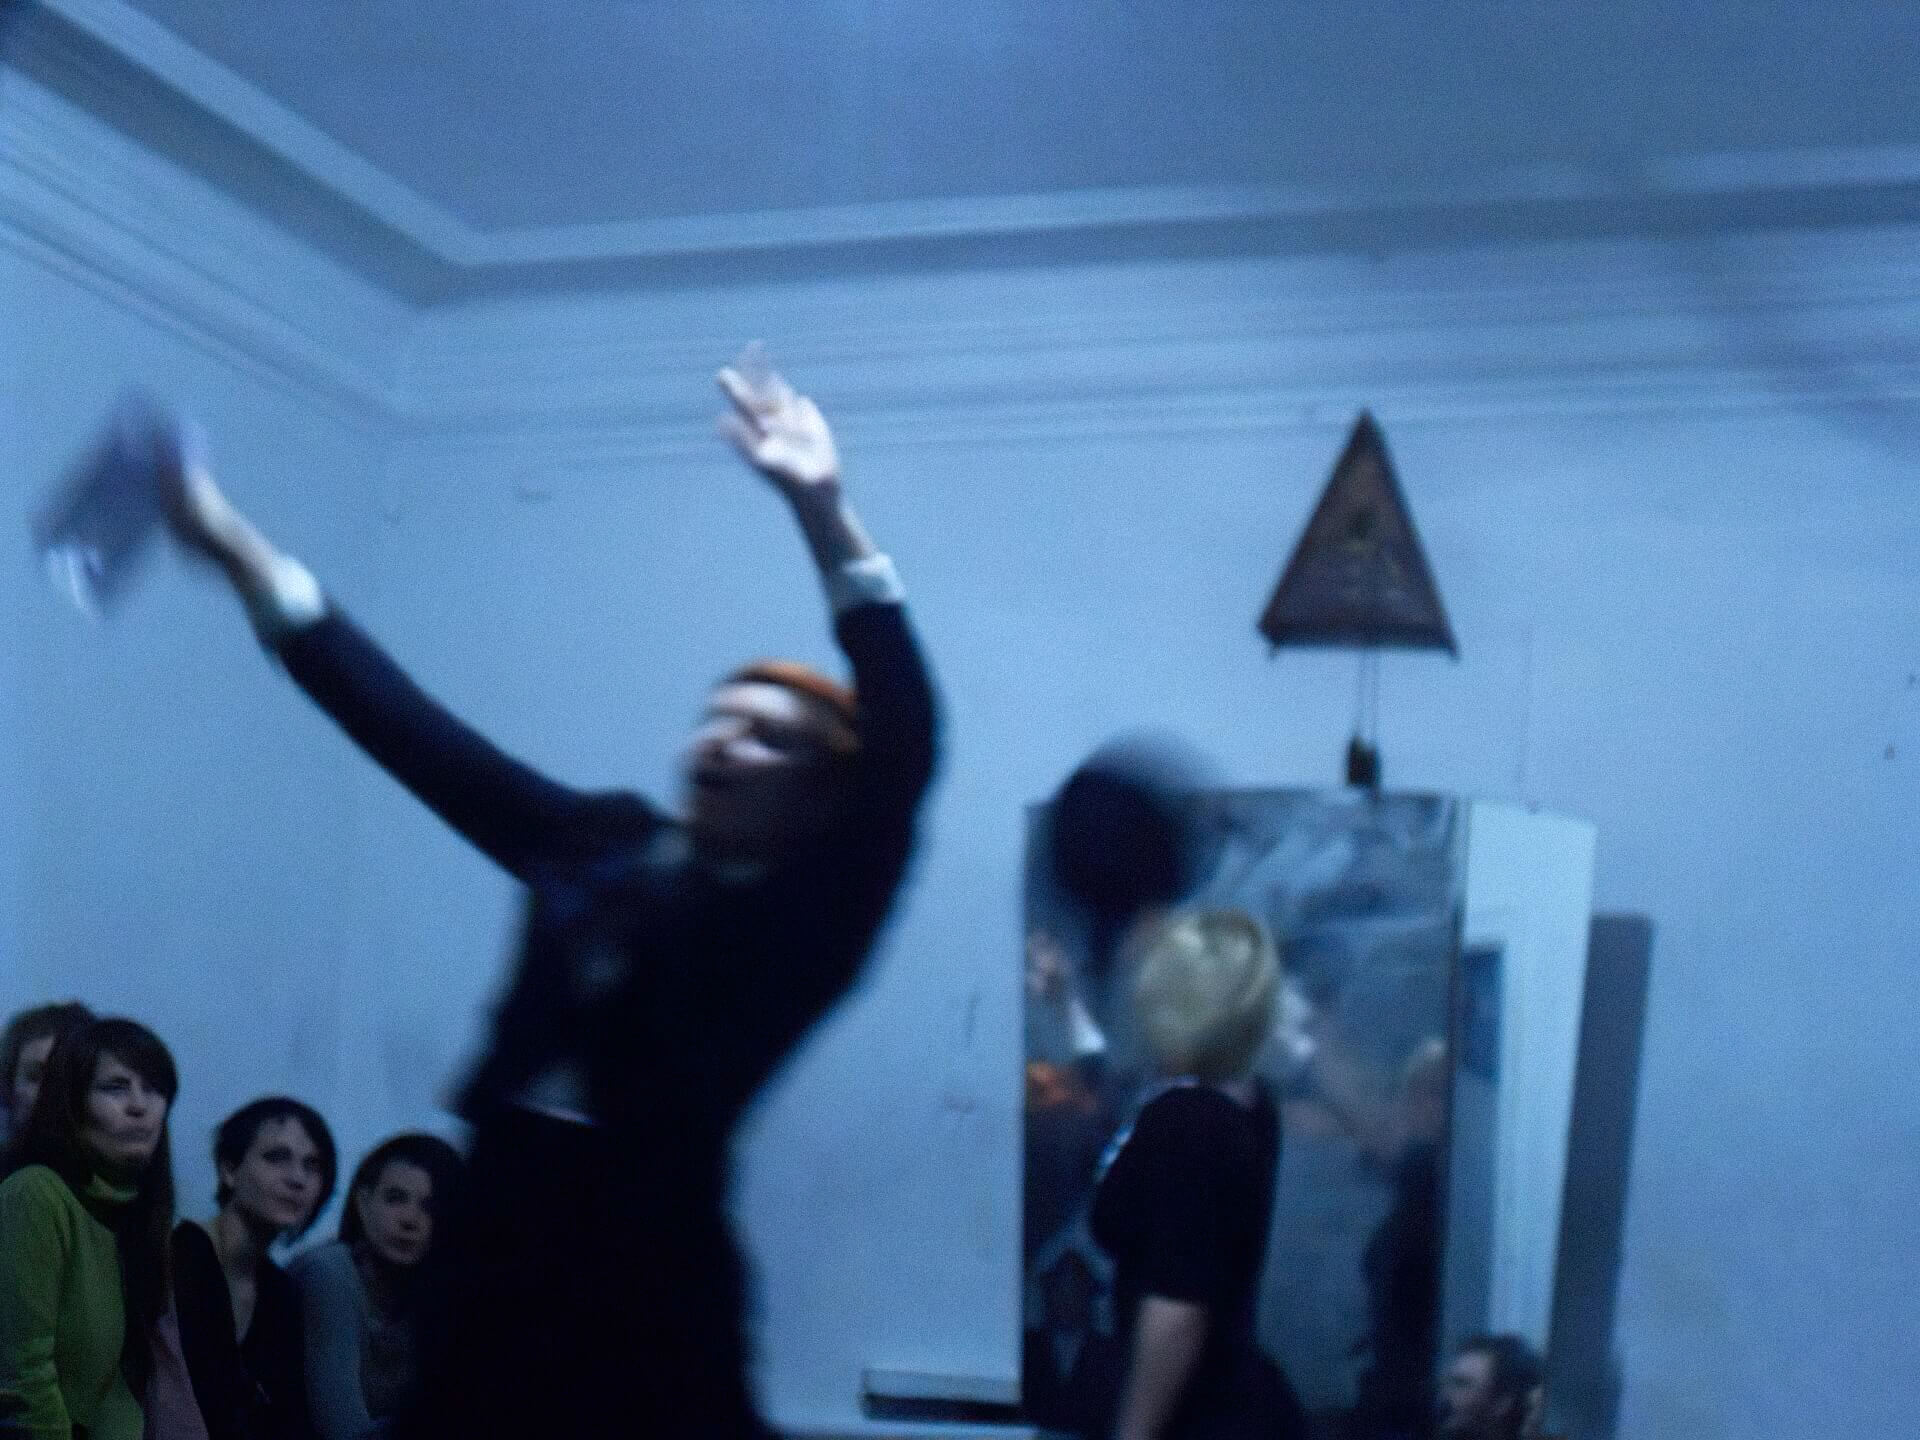 Blurry image of a performer swaying with both arms up in the air